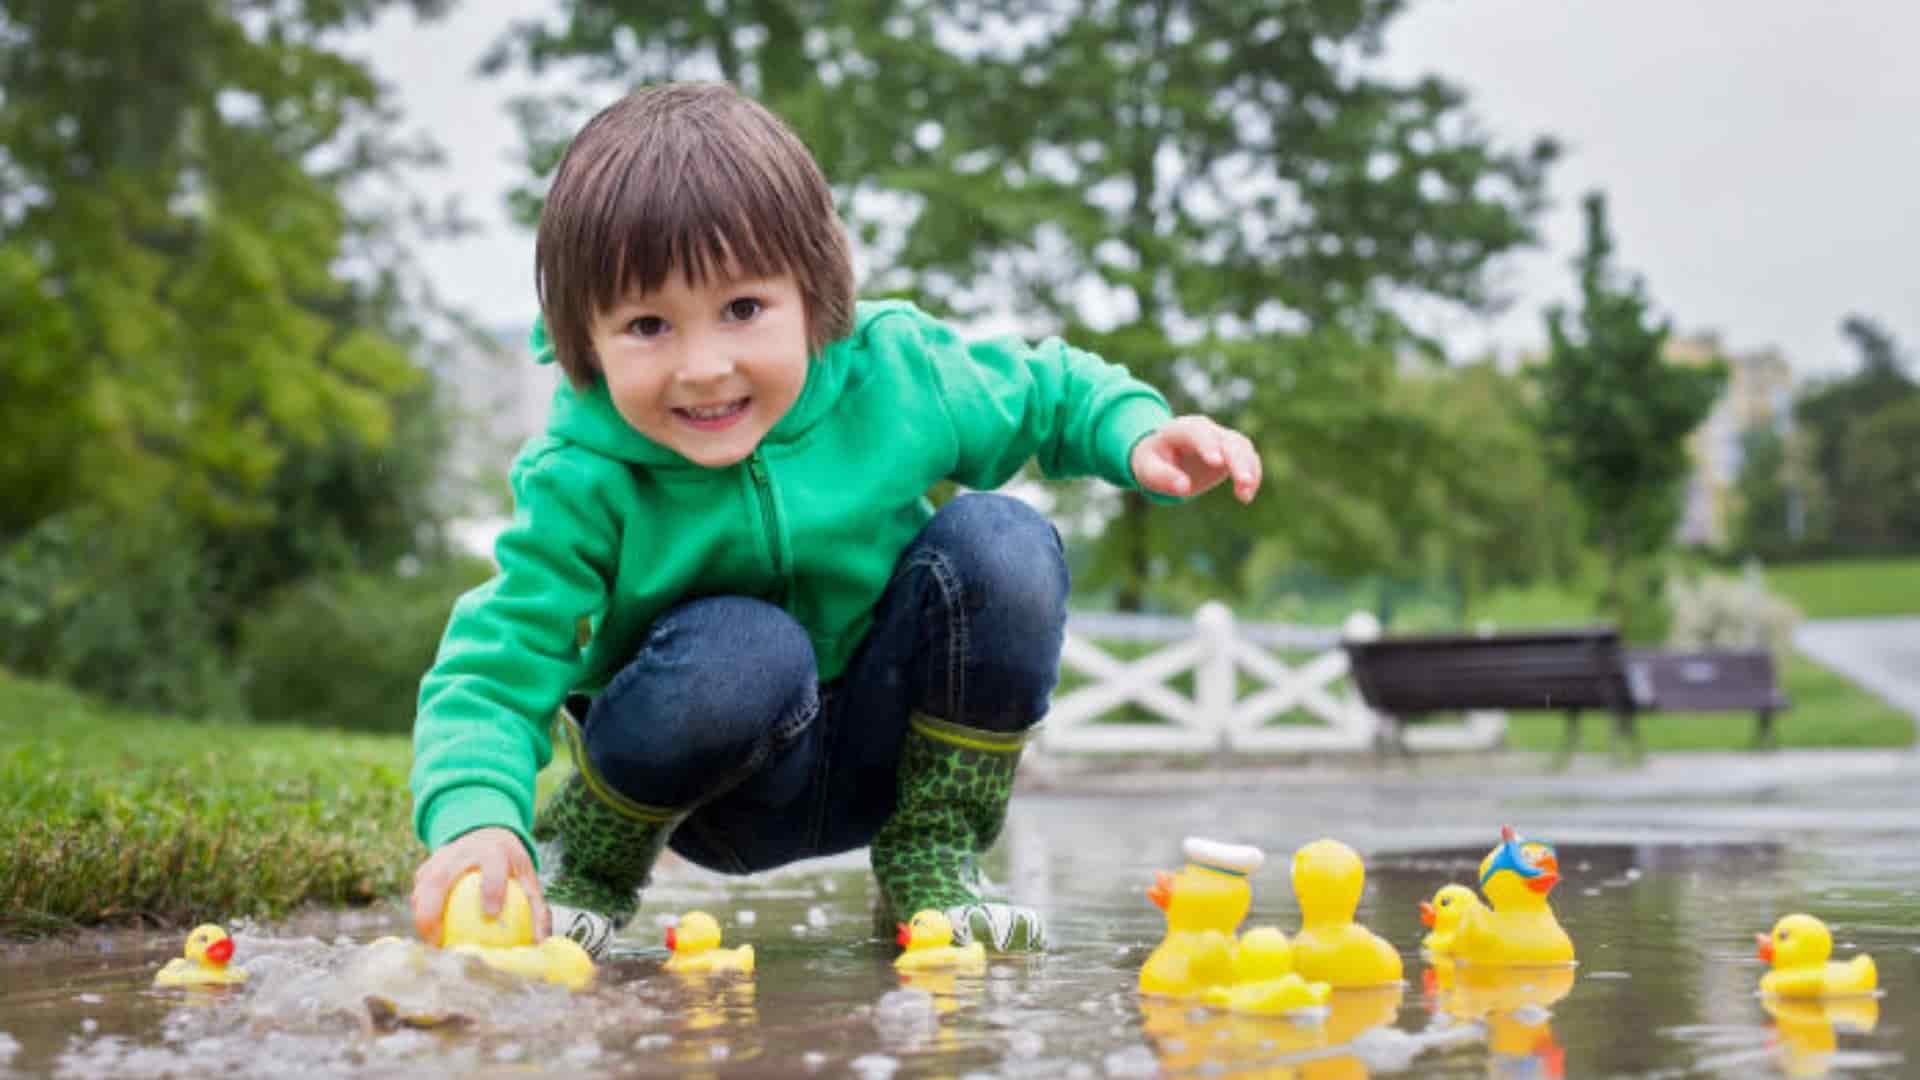 Play with Water Toys in Puddles.